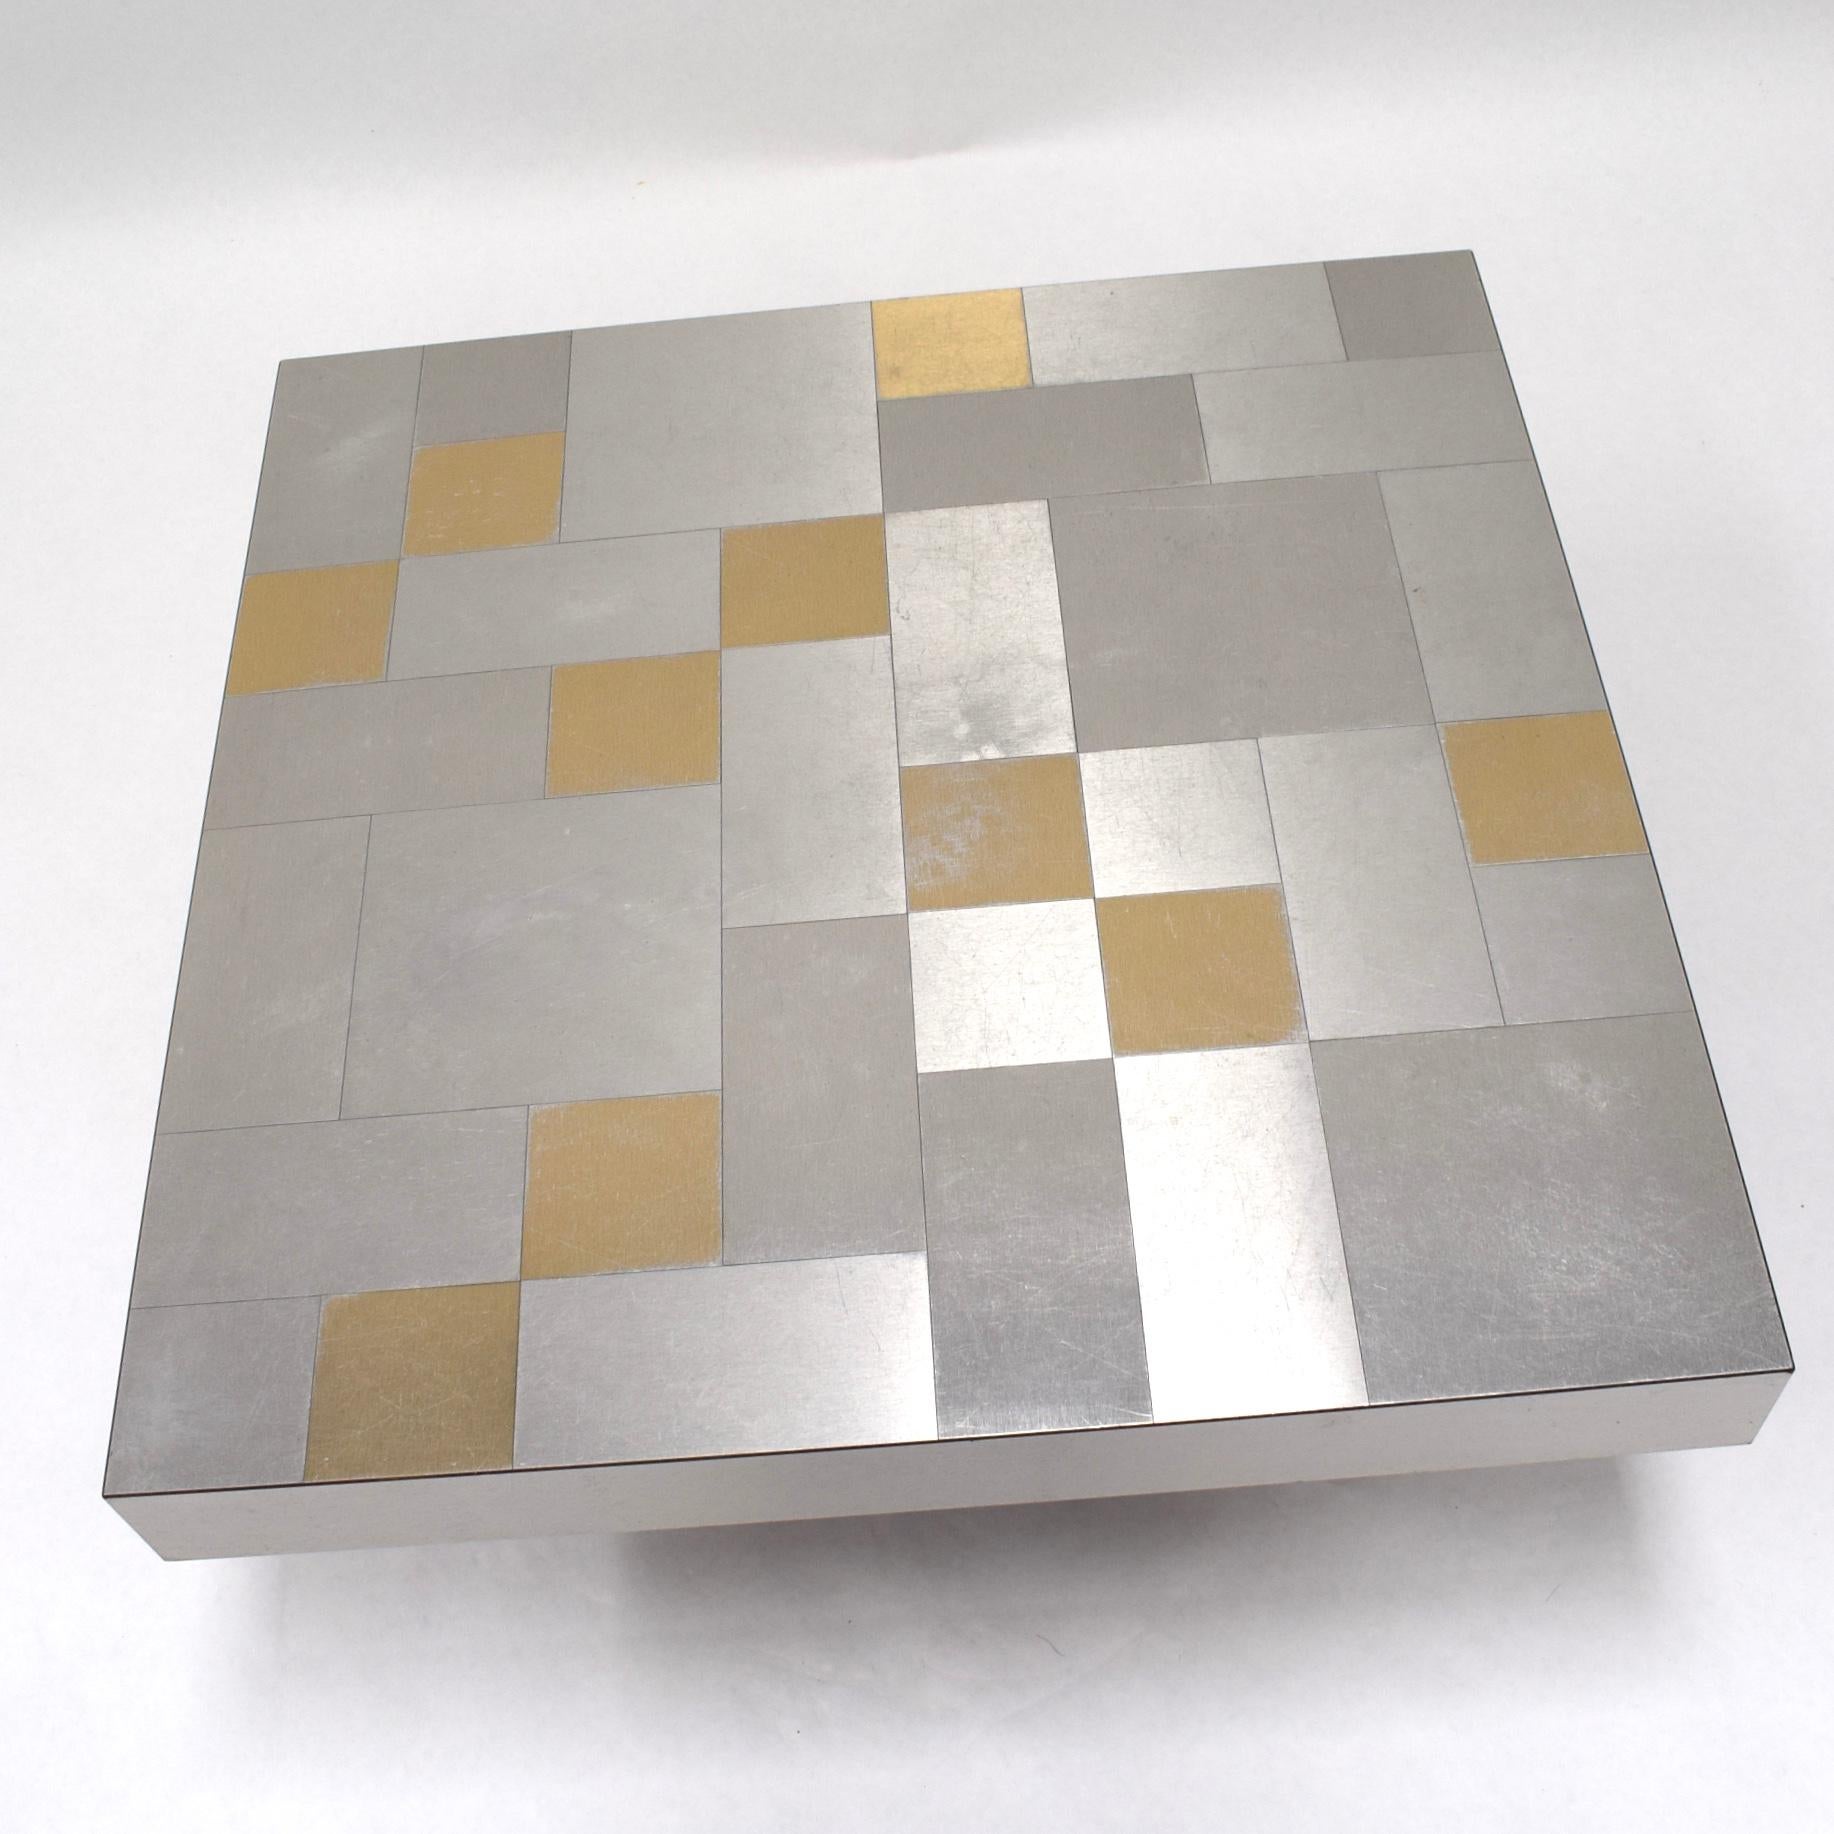 Aluminum 1970s Coffee Table with Aluminium Mosaic Top Gold and Silver Colored